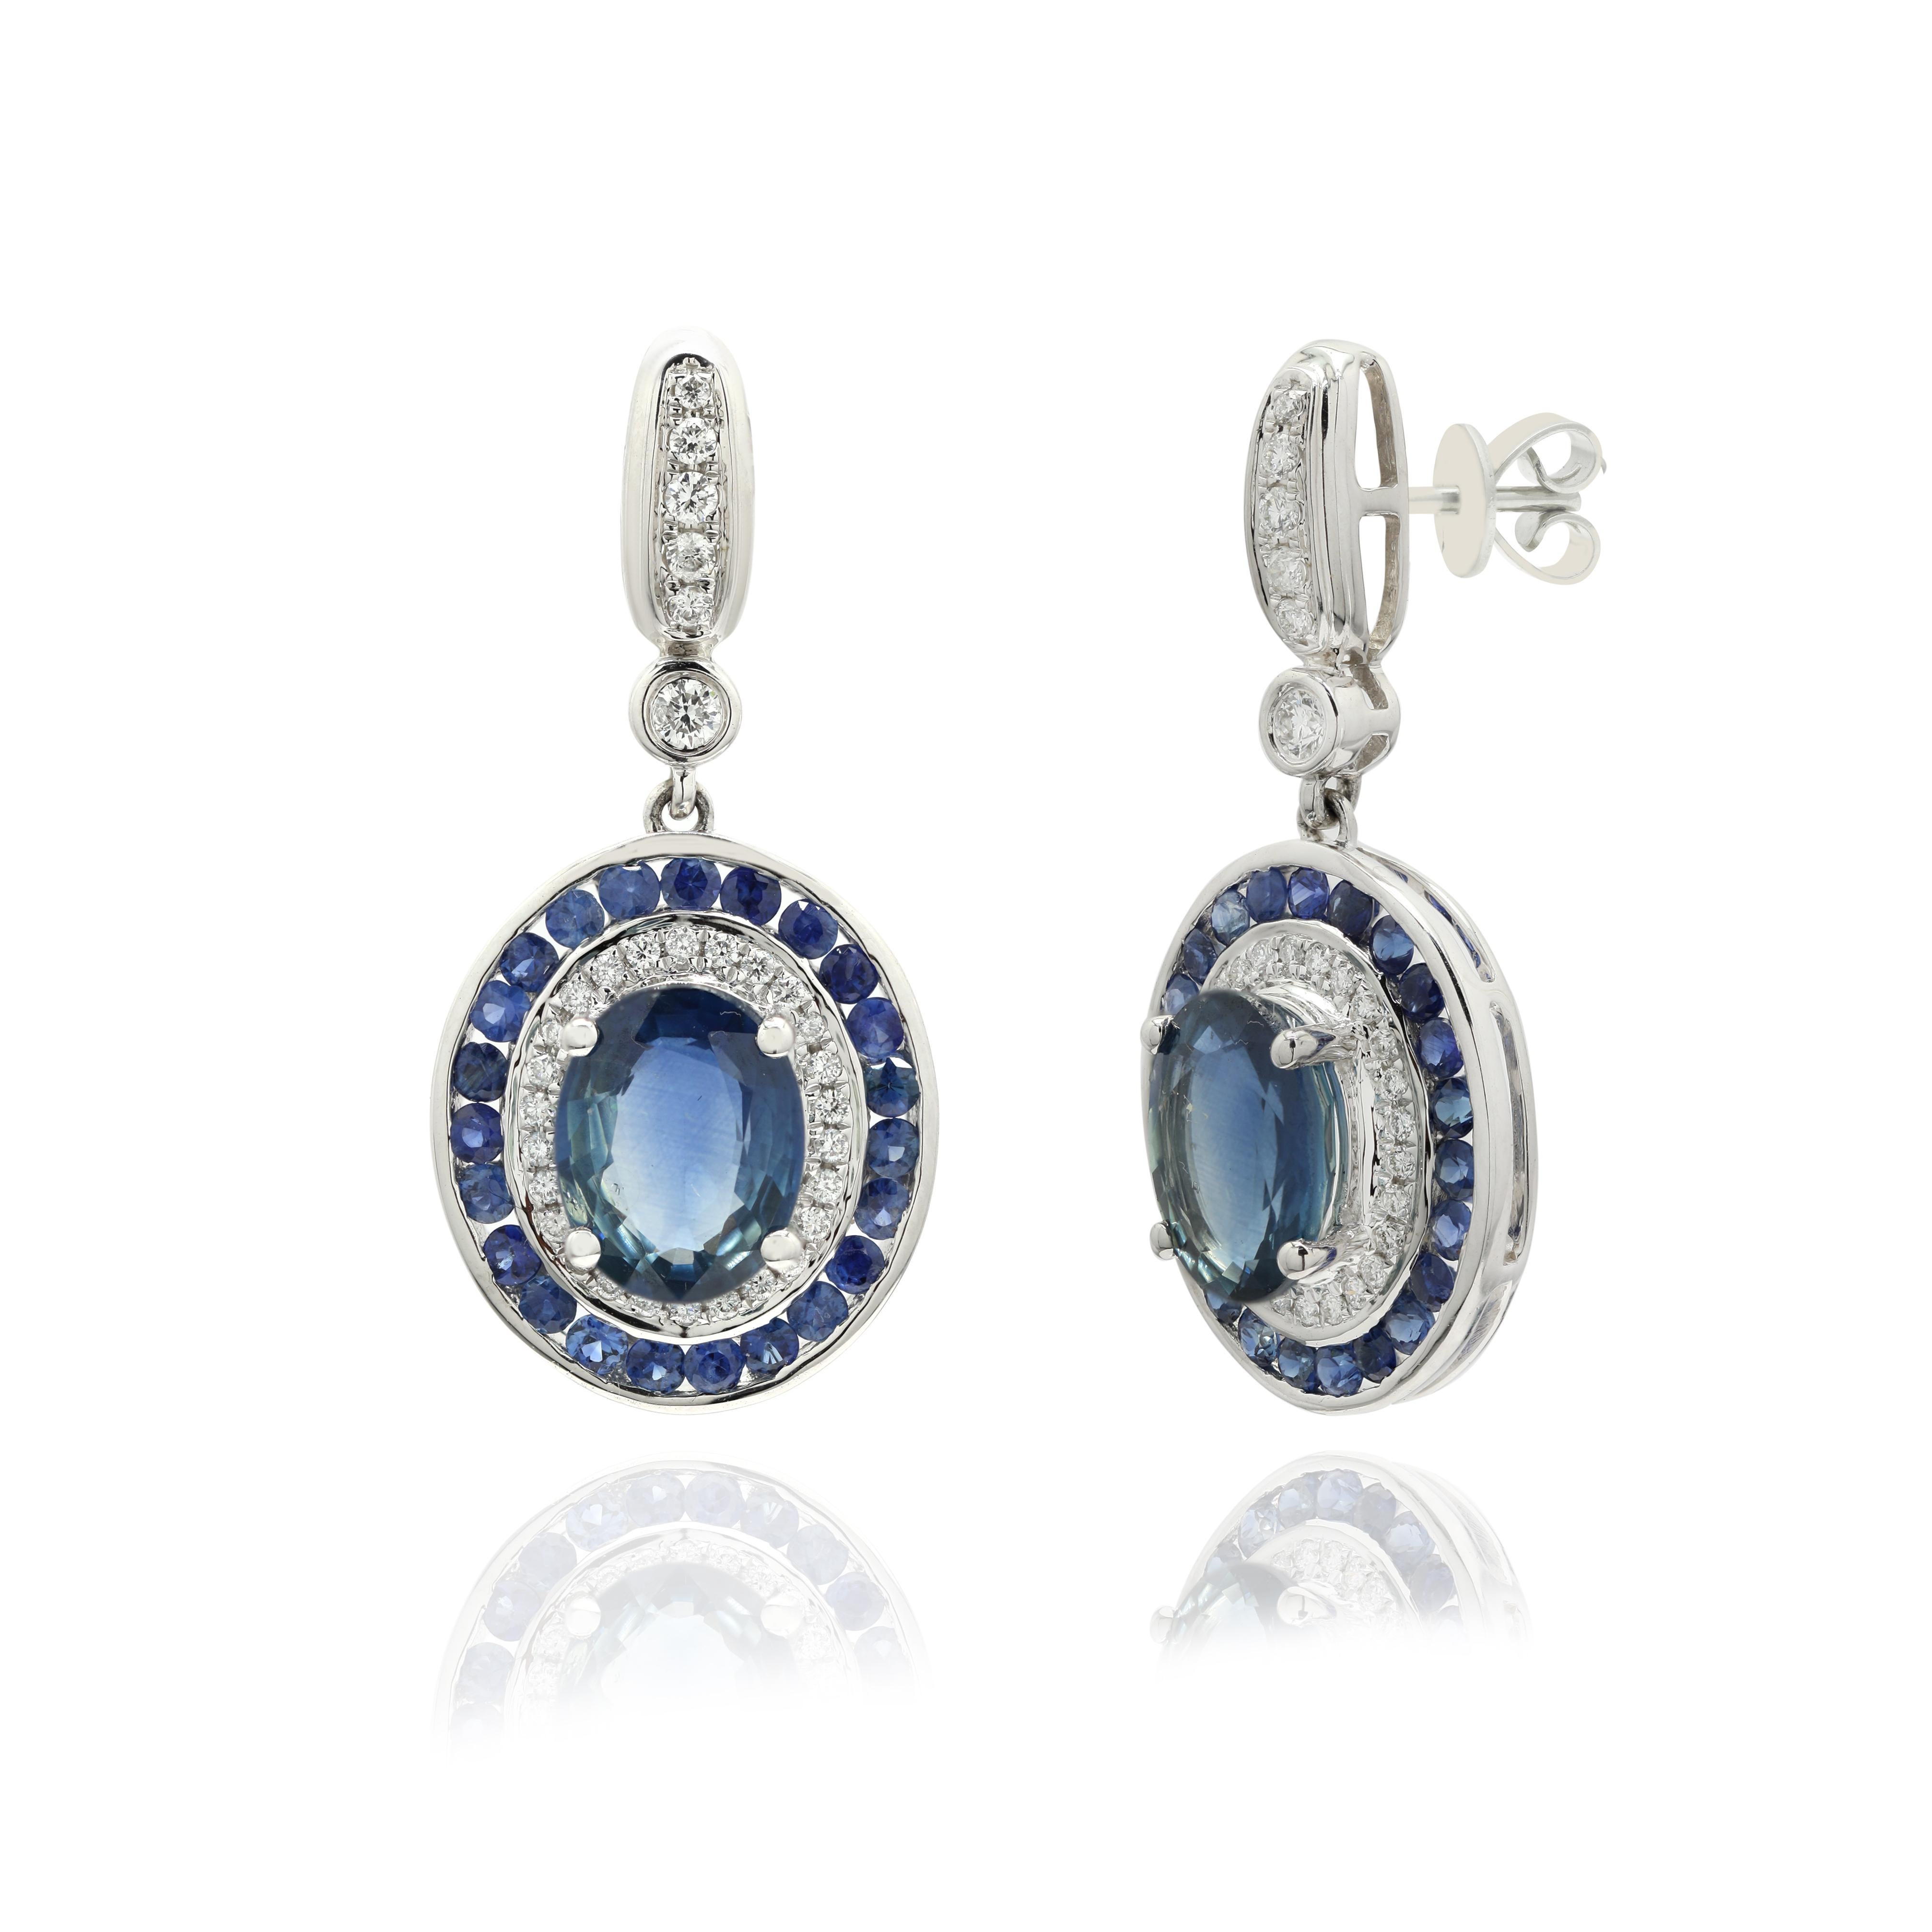 Blue Sapphire Dangle earrings to make a statement with your look. These earrings create a Sparkling, luxurious look featuring oval and round cut gemstone.
If you love to gravitate towards unique styles, this piece of jewelry is perfect for